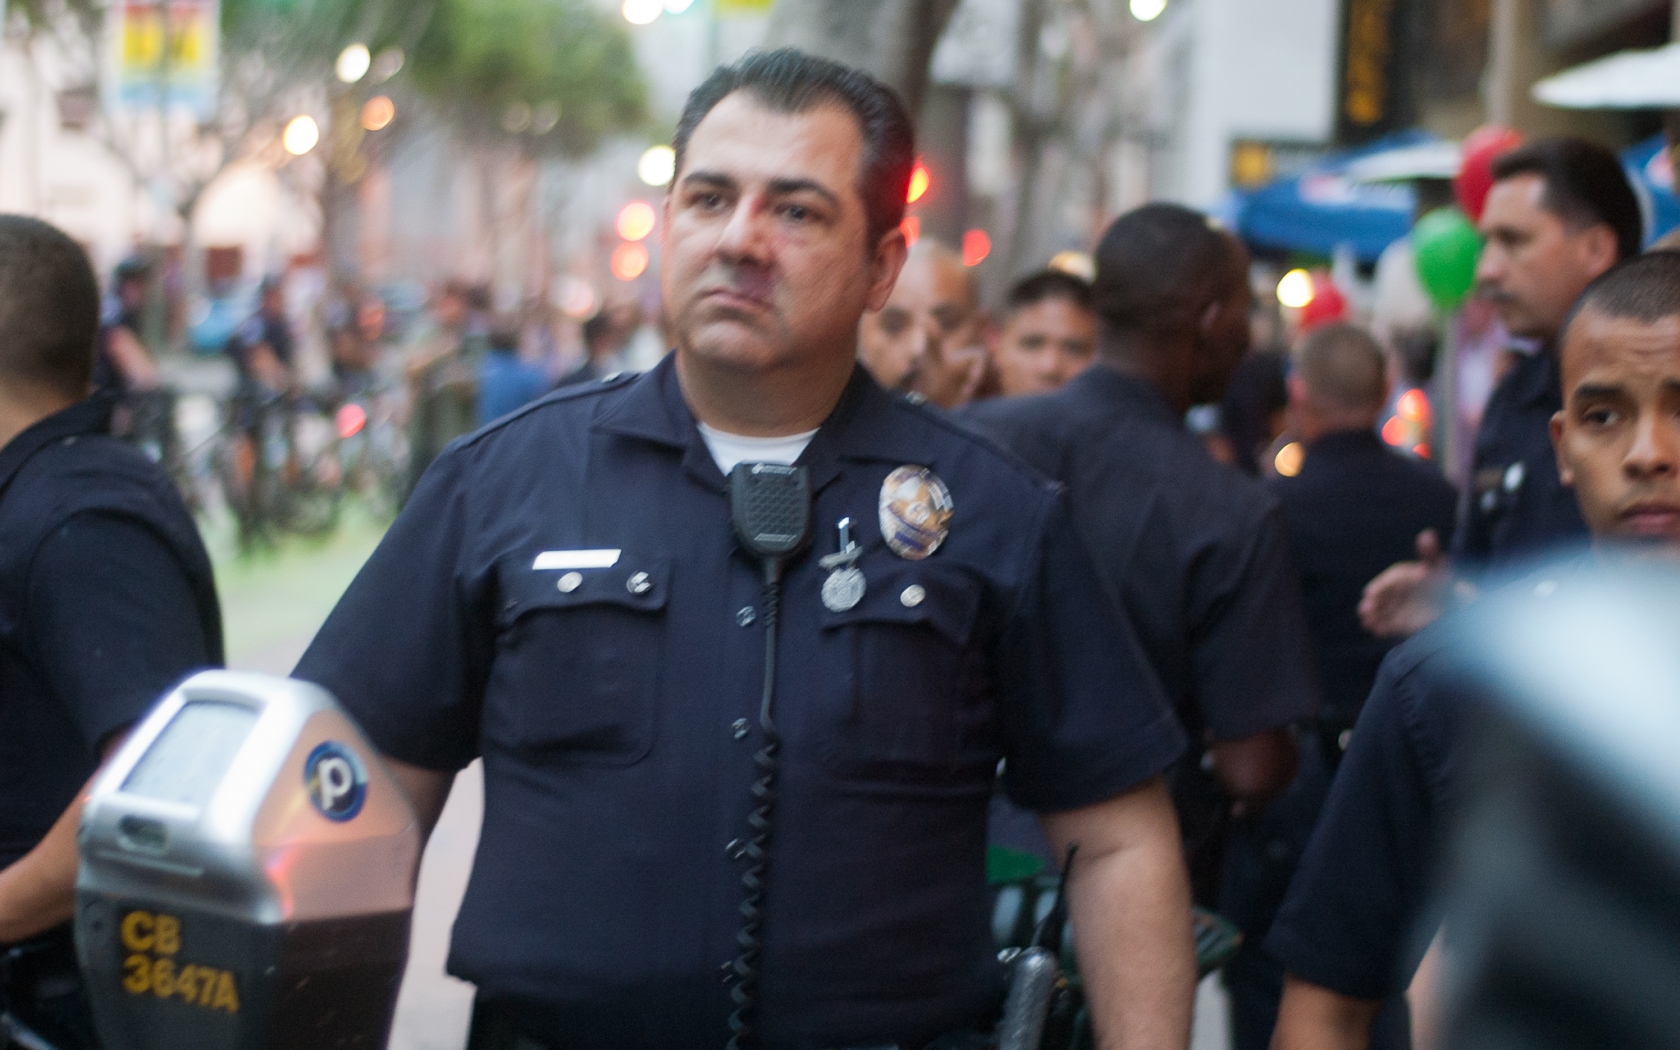 More Lapd Officers With Capt Frank In Background